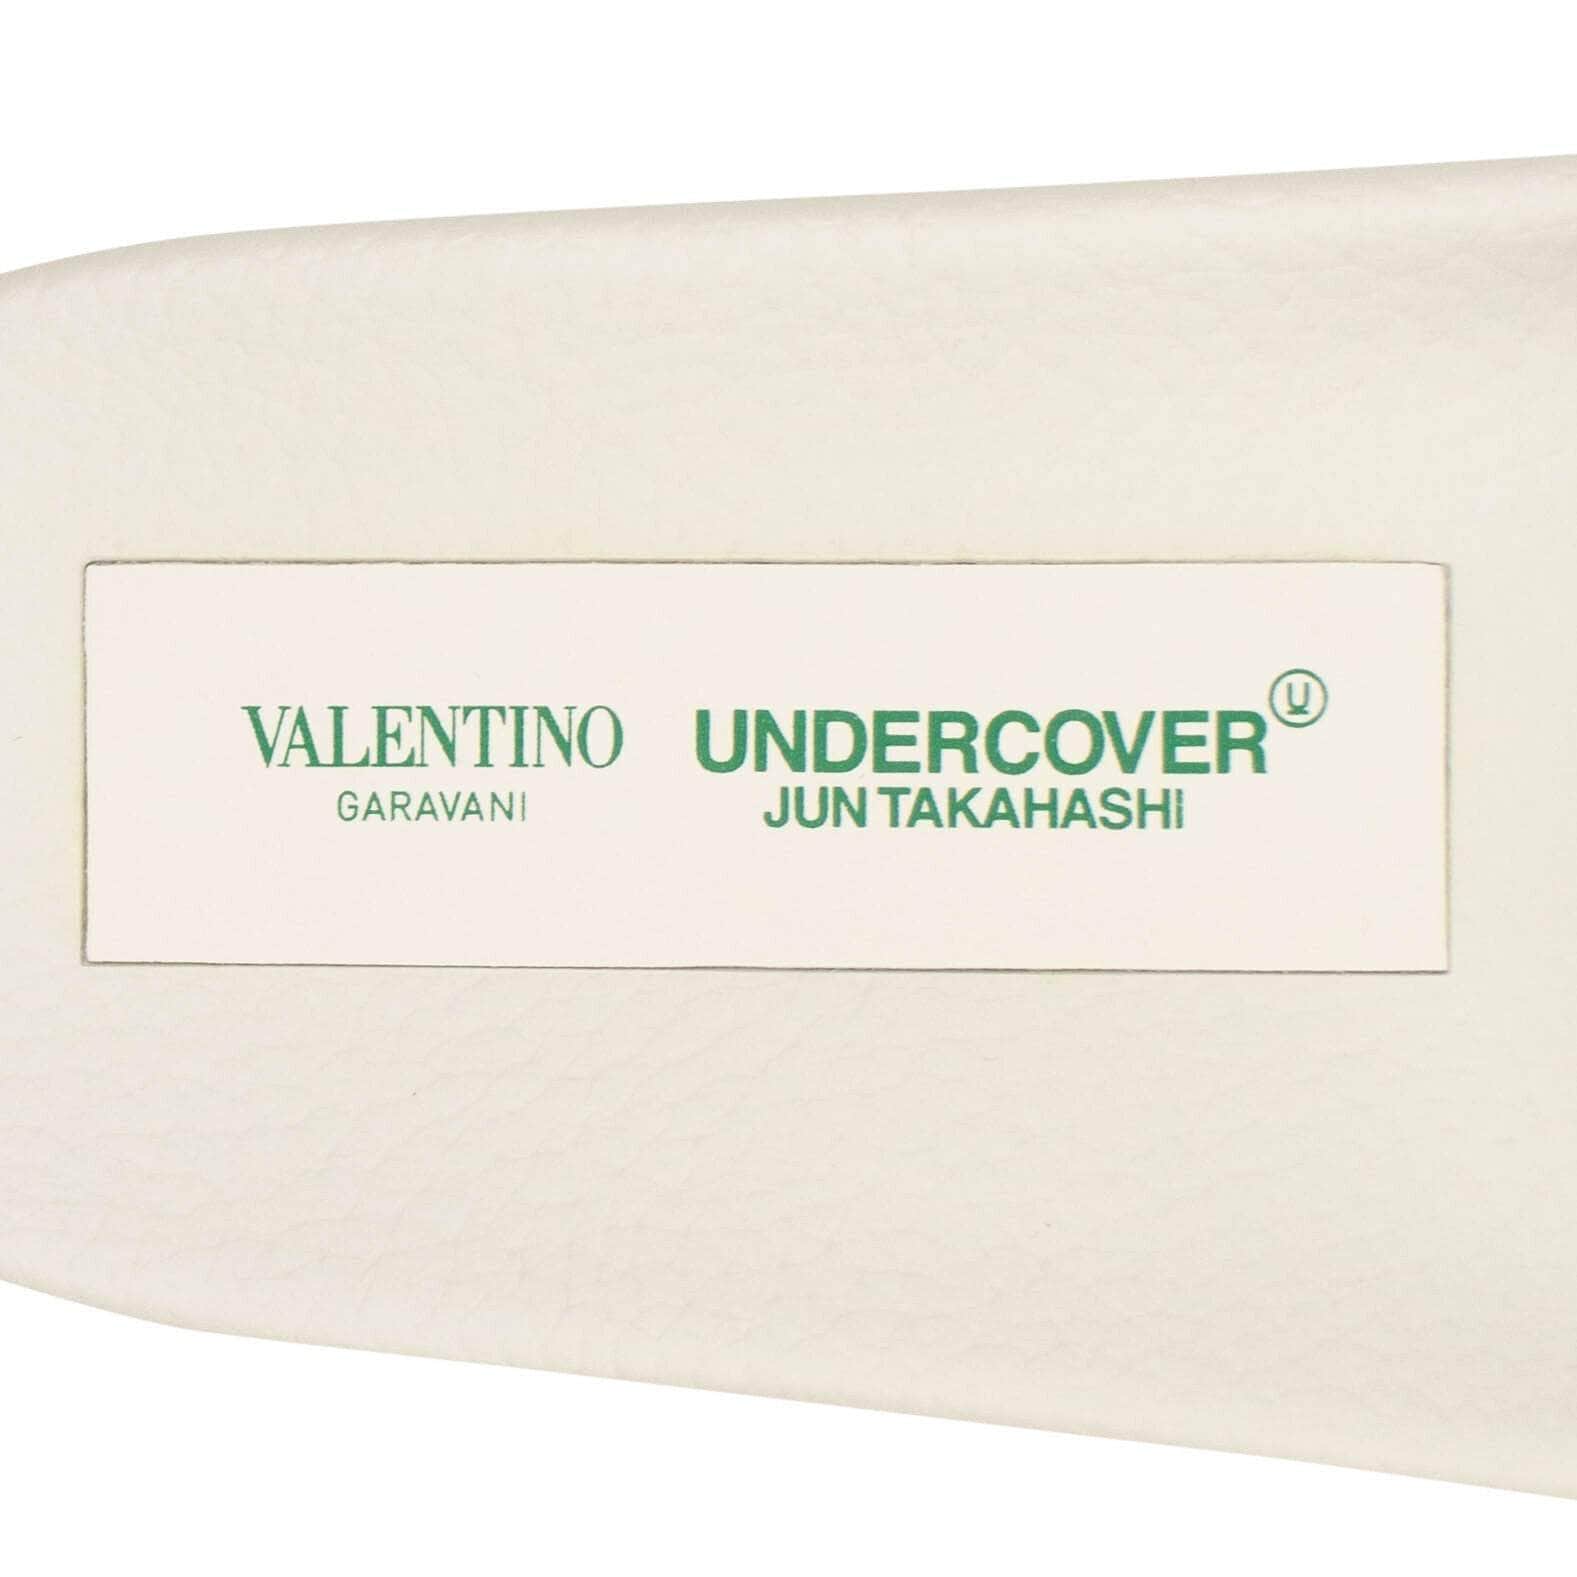 Valentino x Undercover 250-500, channelenable-all, chicmi, couponcollection, gender-mens, main-shoes, mens-slides-slippers, size-39, size-40, size-41, size-42, size-43, size-44, valentino-x-undercover UFO Face Pool Slides